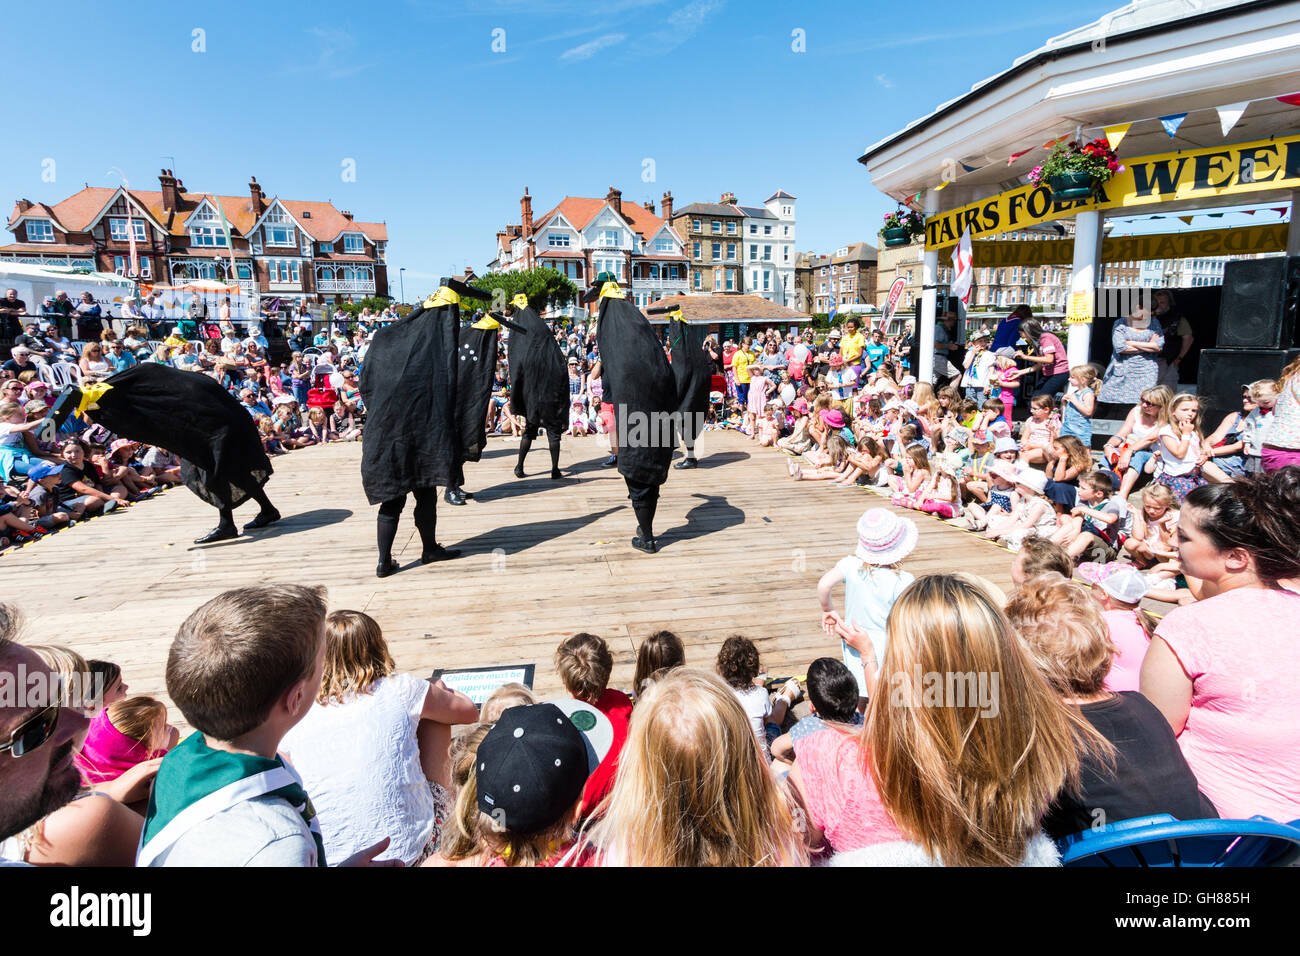 Popular Hobby Horse Club event for families and children at the Broadstairs folk week. Ossies, black bird type creatures each with a man inside, dancing on the deck by the bandstand, surrounding by audience of children and parents. Stock Photo